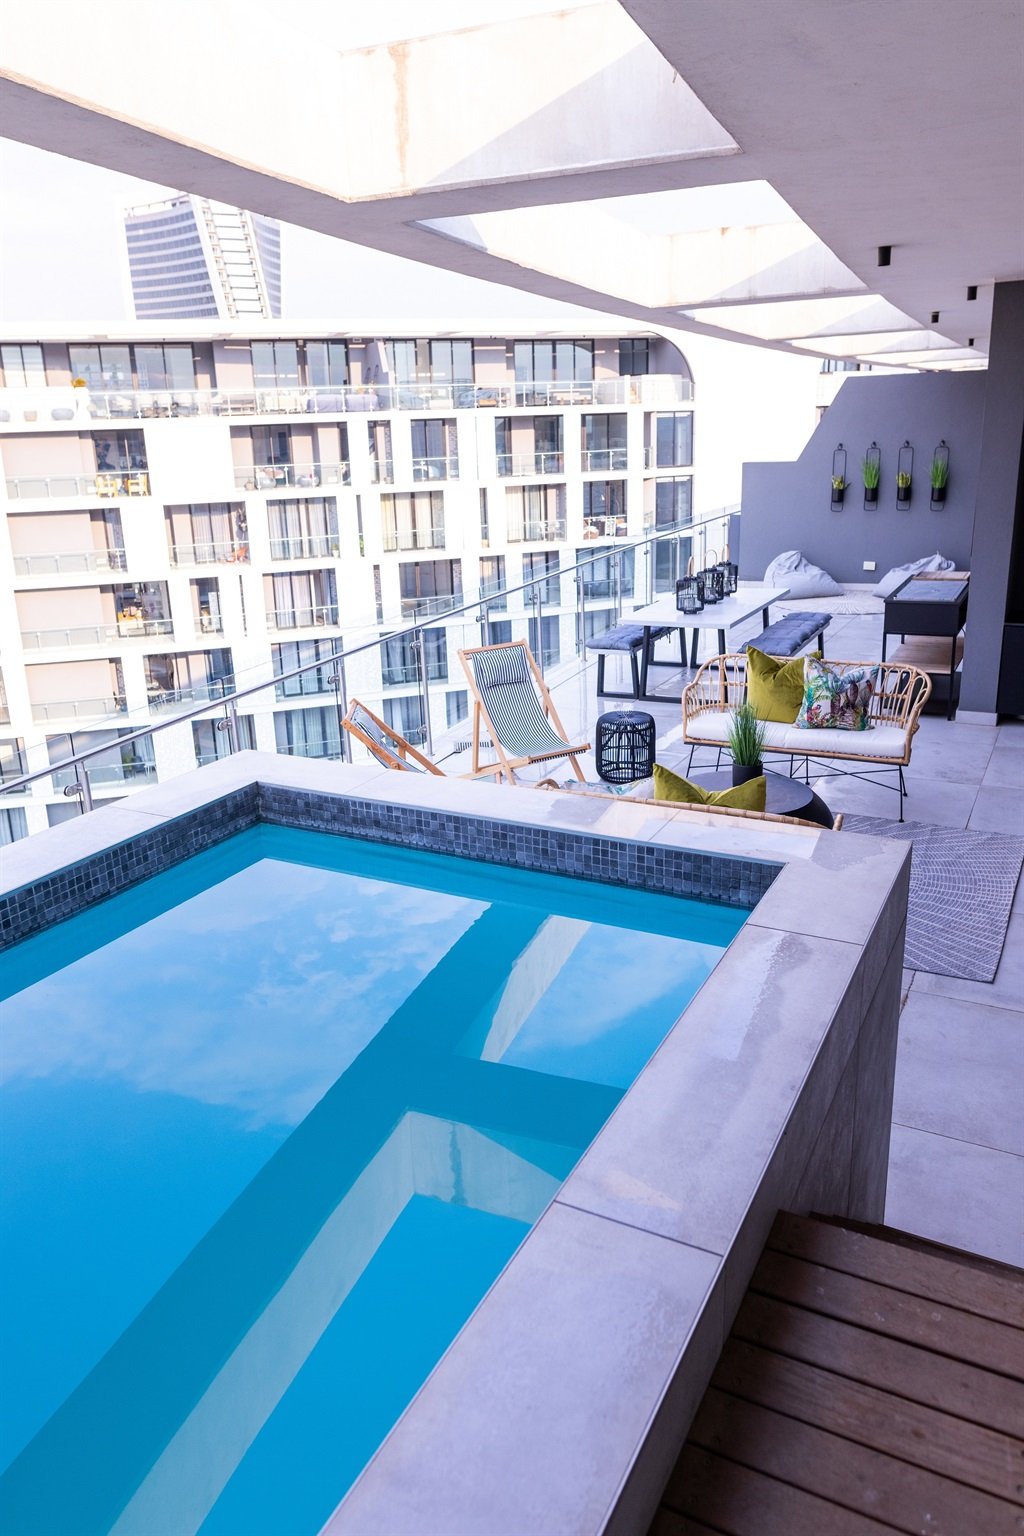 The pool area of Miss South Africa 2022's R1056mil